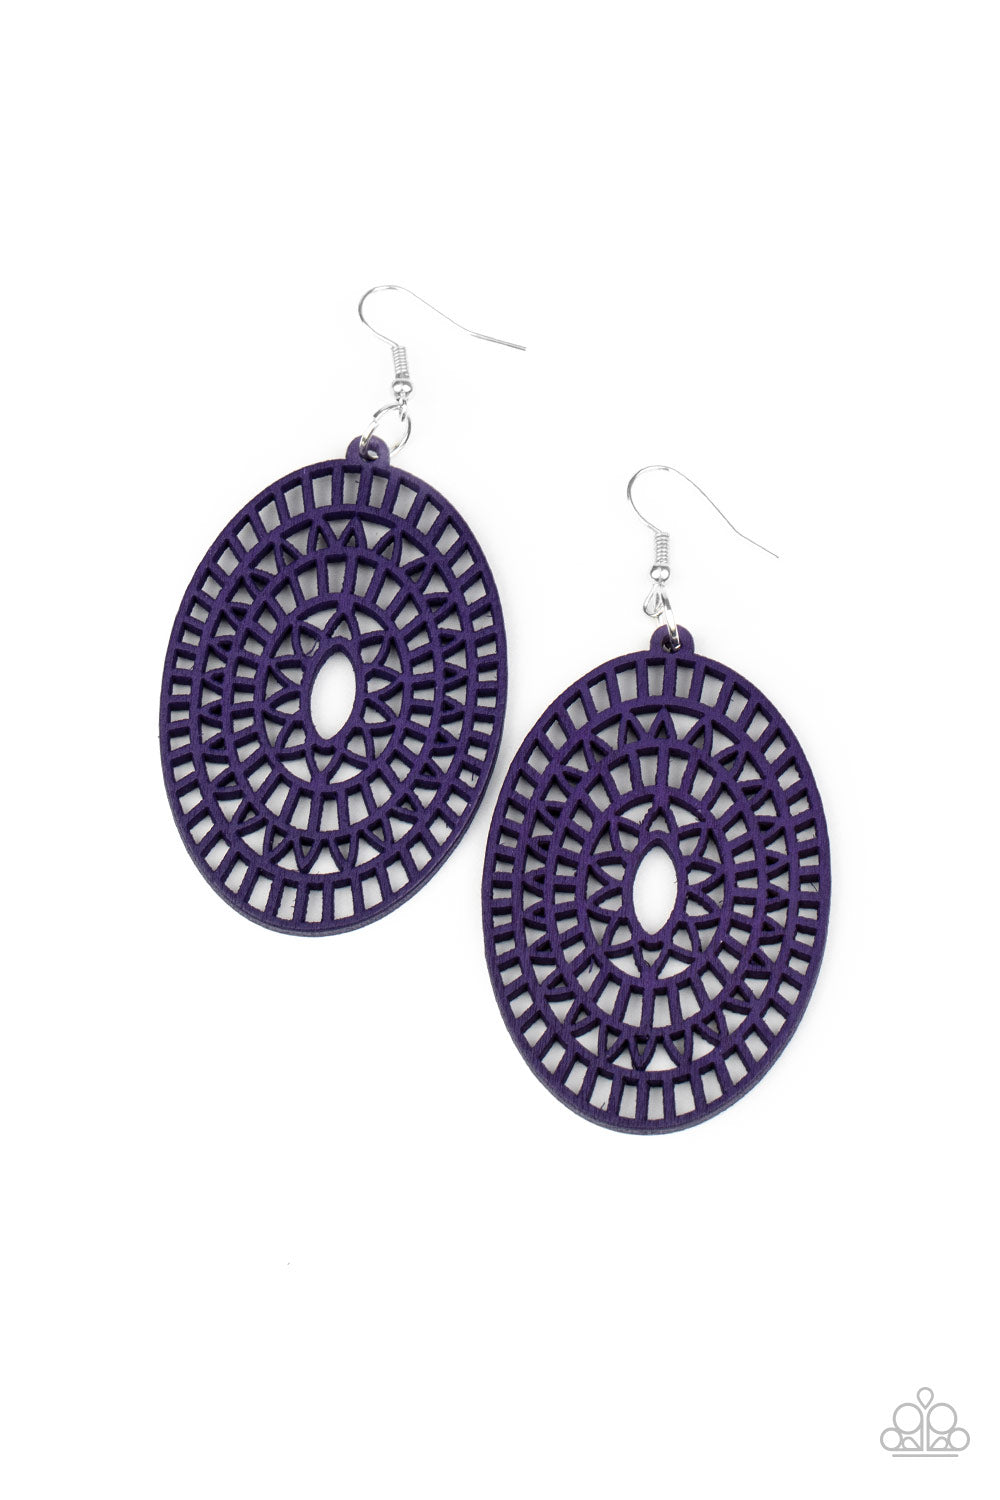 &lt;P&gt;Painted in a vivacious purple finish, an oval wooden frame has been cut into an airy floral stencil for a seasonal flair. Earring attaches to a standard fishhook fitting.
&lt;/P&gt;  

&lt;P&gt; &lt;I&gt;  Sold as one pair of earrings. &lt;/I&gt;  &lt;/P&gt;


&lt;img src=\&quot;https://d9b54x484lq62.cloudfront.net/paparazzi/shopping/images/517_tag150x115_1.png\&quot; alt=\&quot;New Kit\&quot; align=\&quot;middle\&quot; height=\&quot;50\&quot; width=\&quot;50\&quot;/&gt;